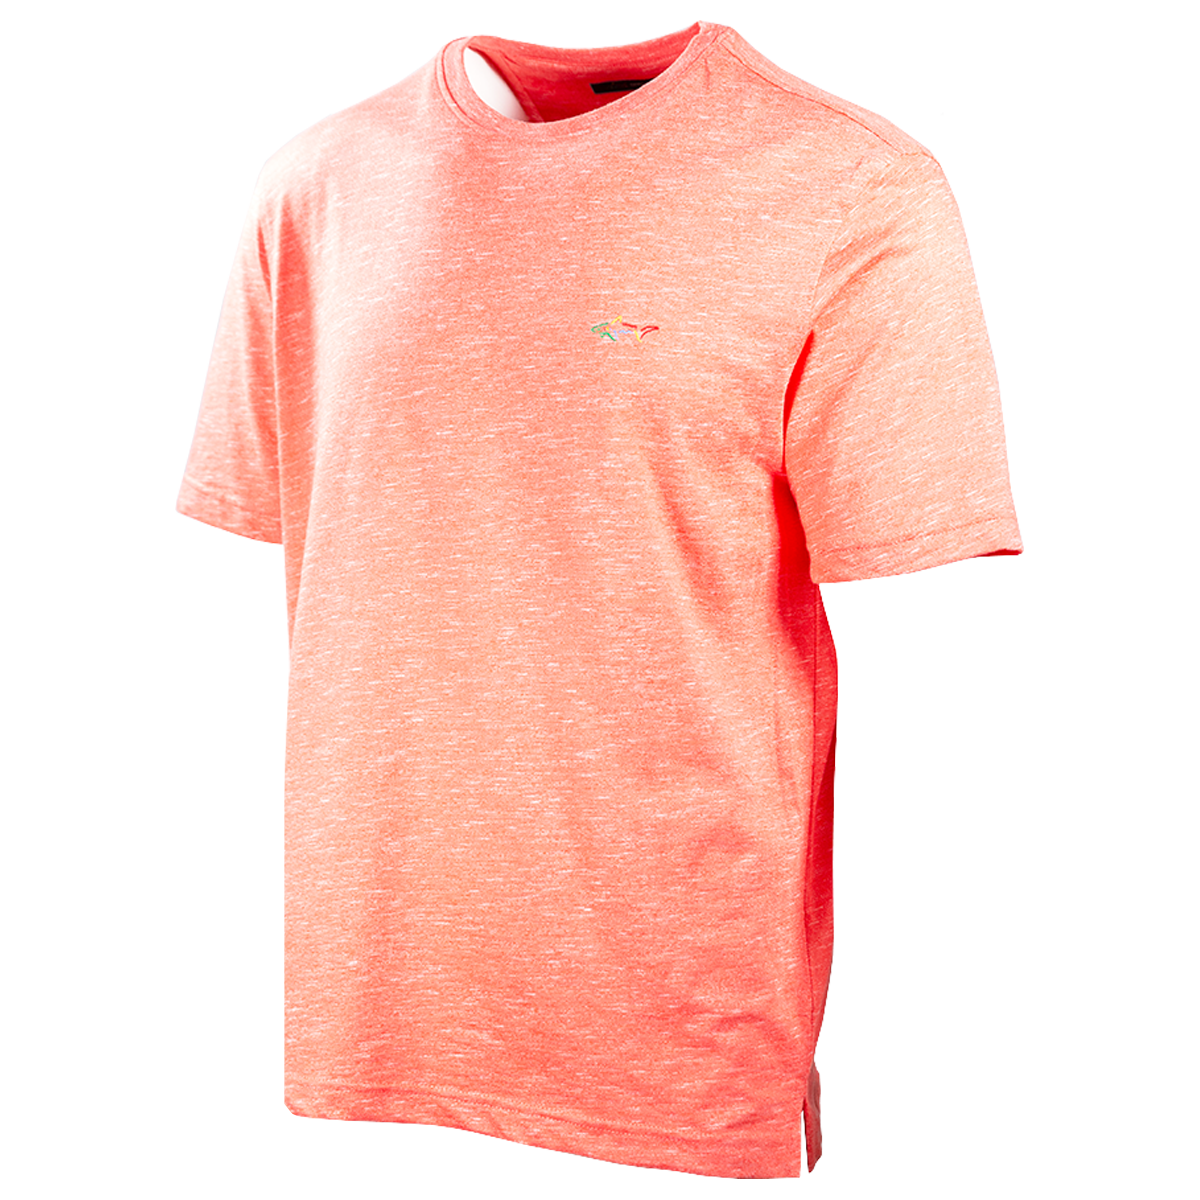 Greg Norman Men's Heather Salmon Pink S/S T-Shirt (S01B) Size Large